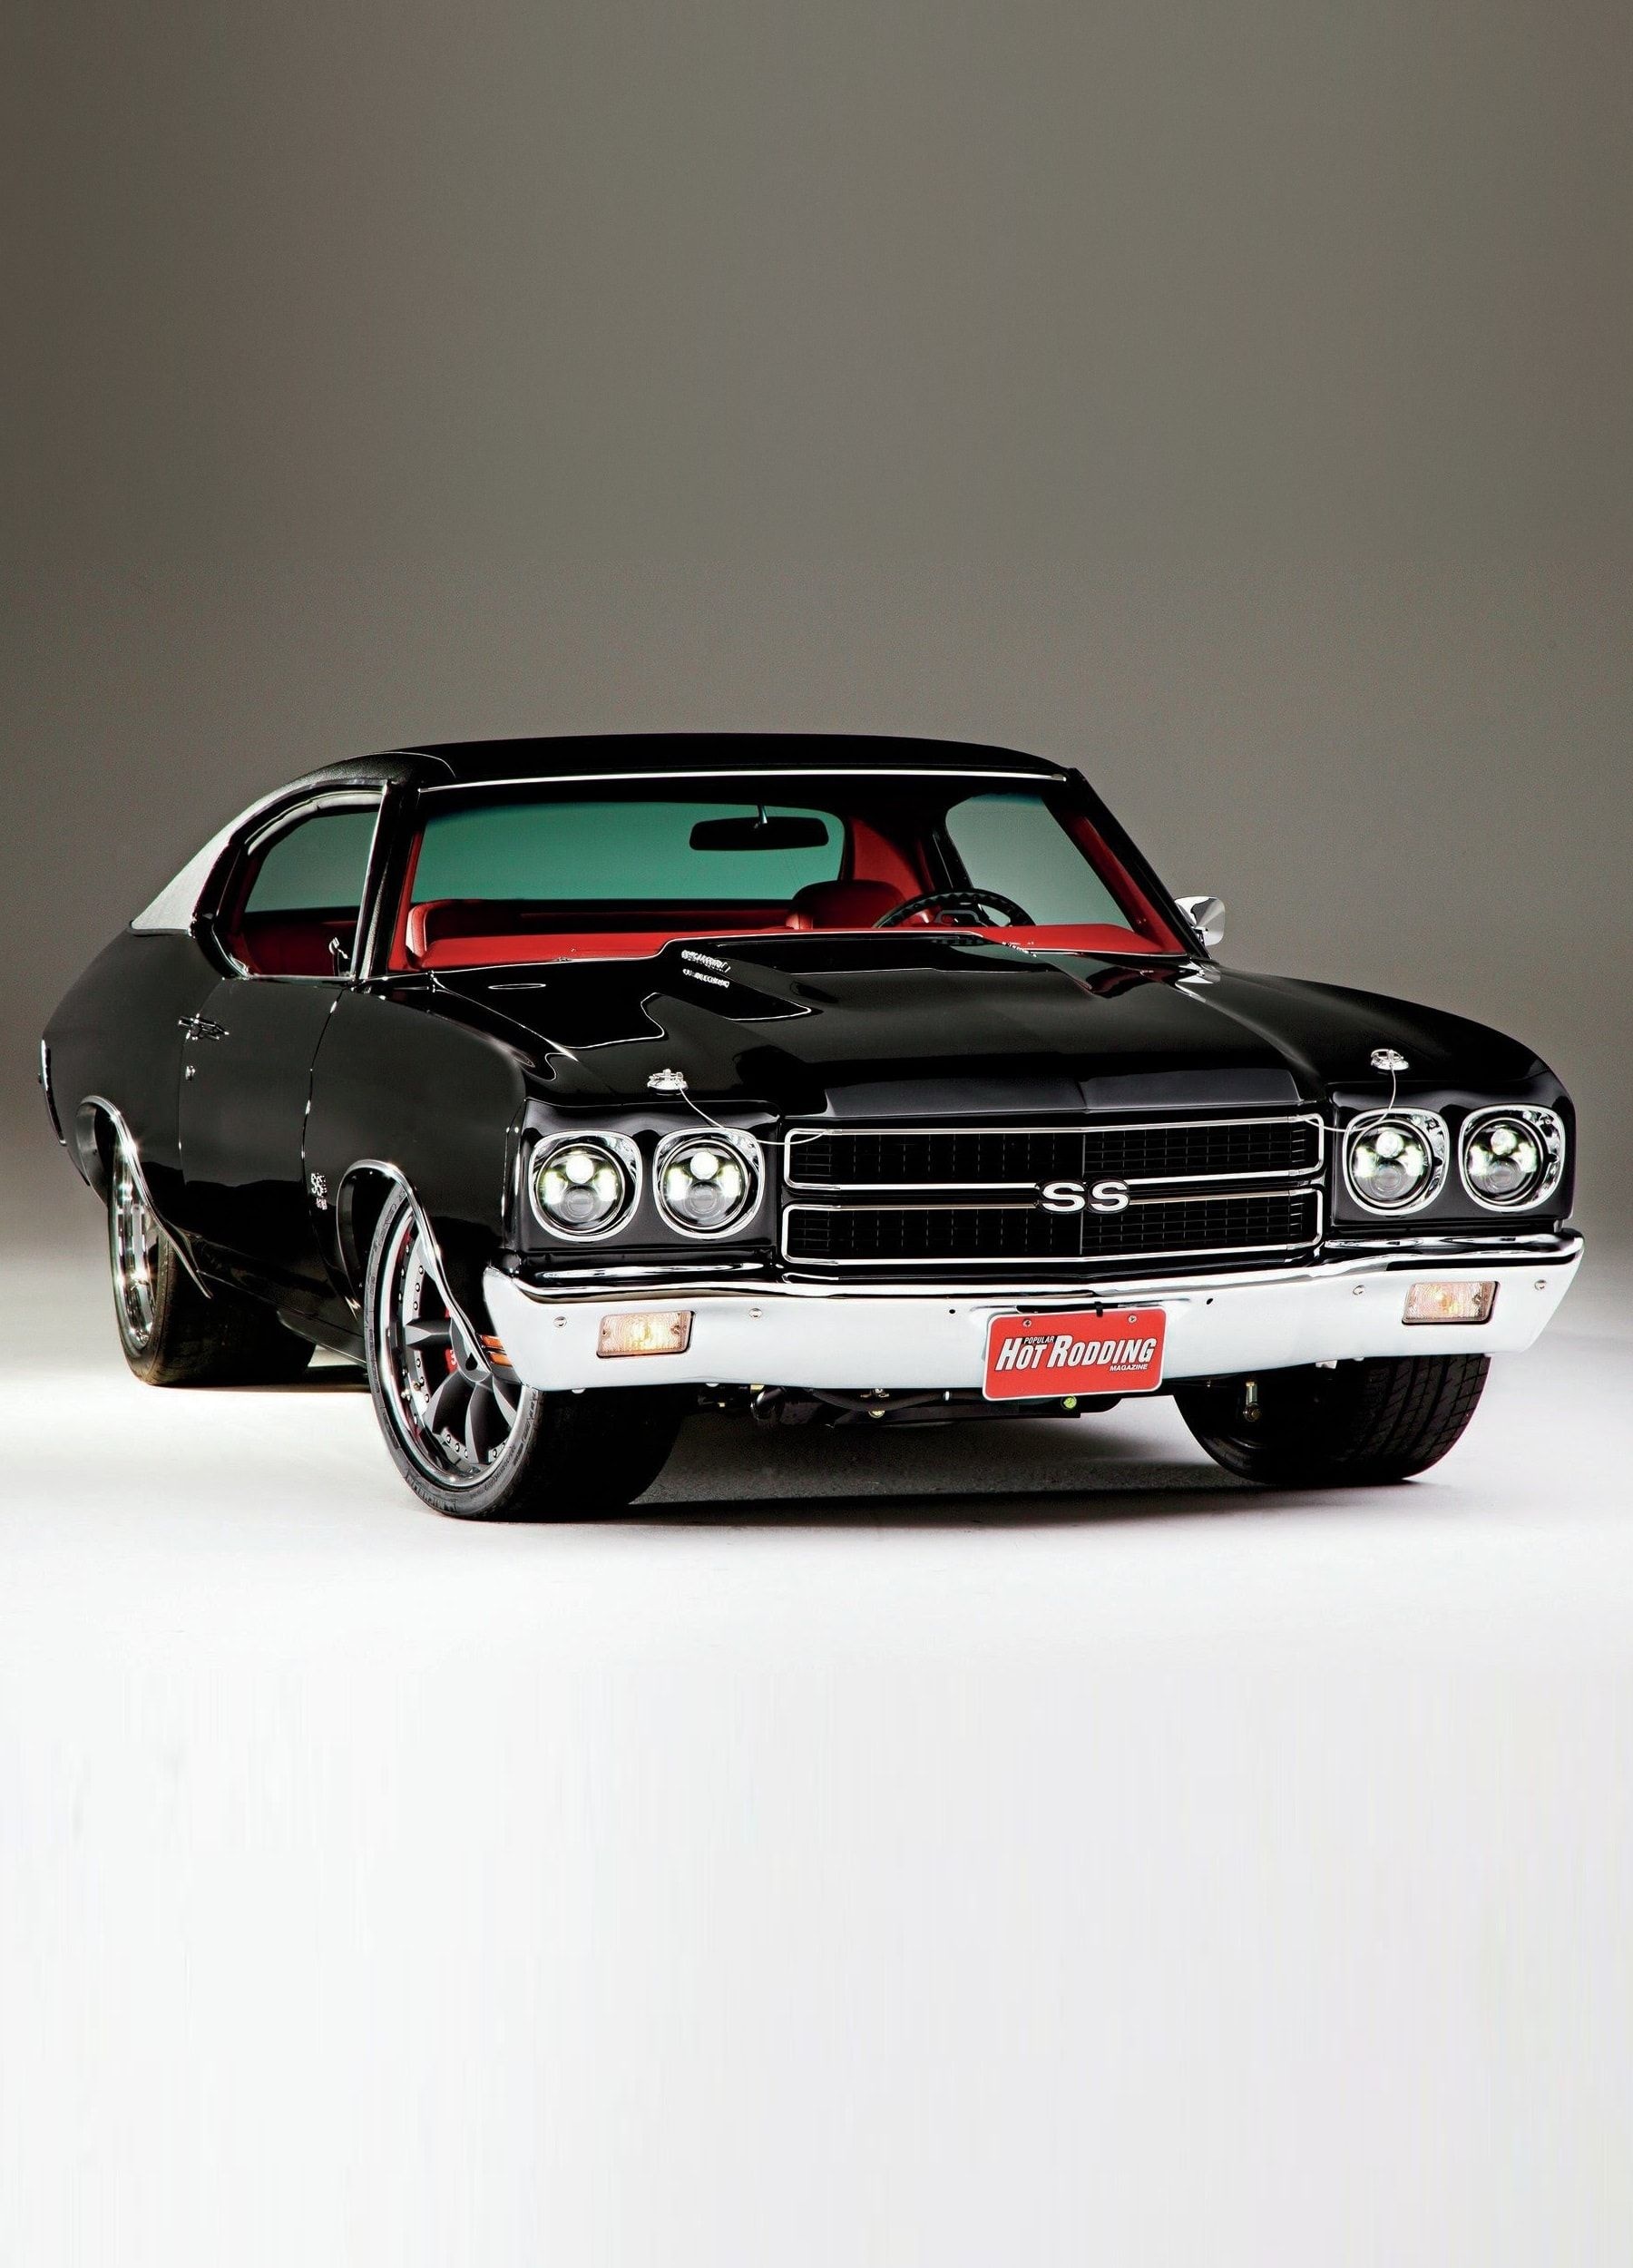 Smartphone Chevelle scene, Vintage car collection, Engineered muscle, Chevelle SS gallery, Auto wallpapers cave, 1800x2500 HD Phone